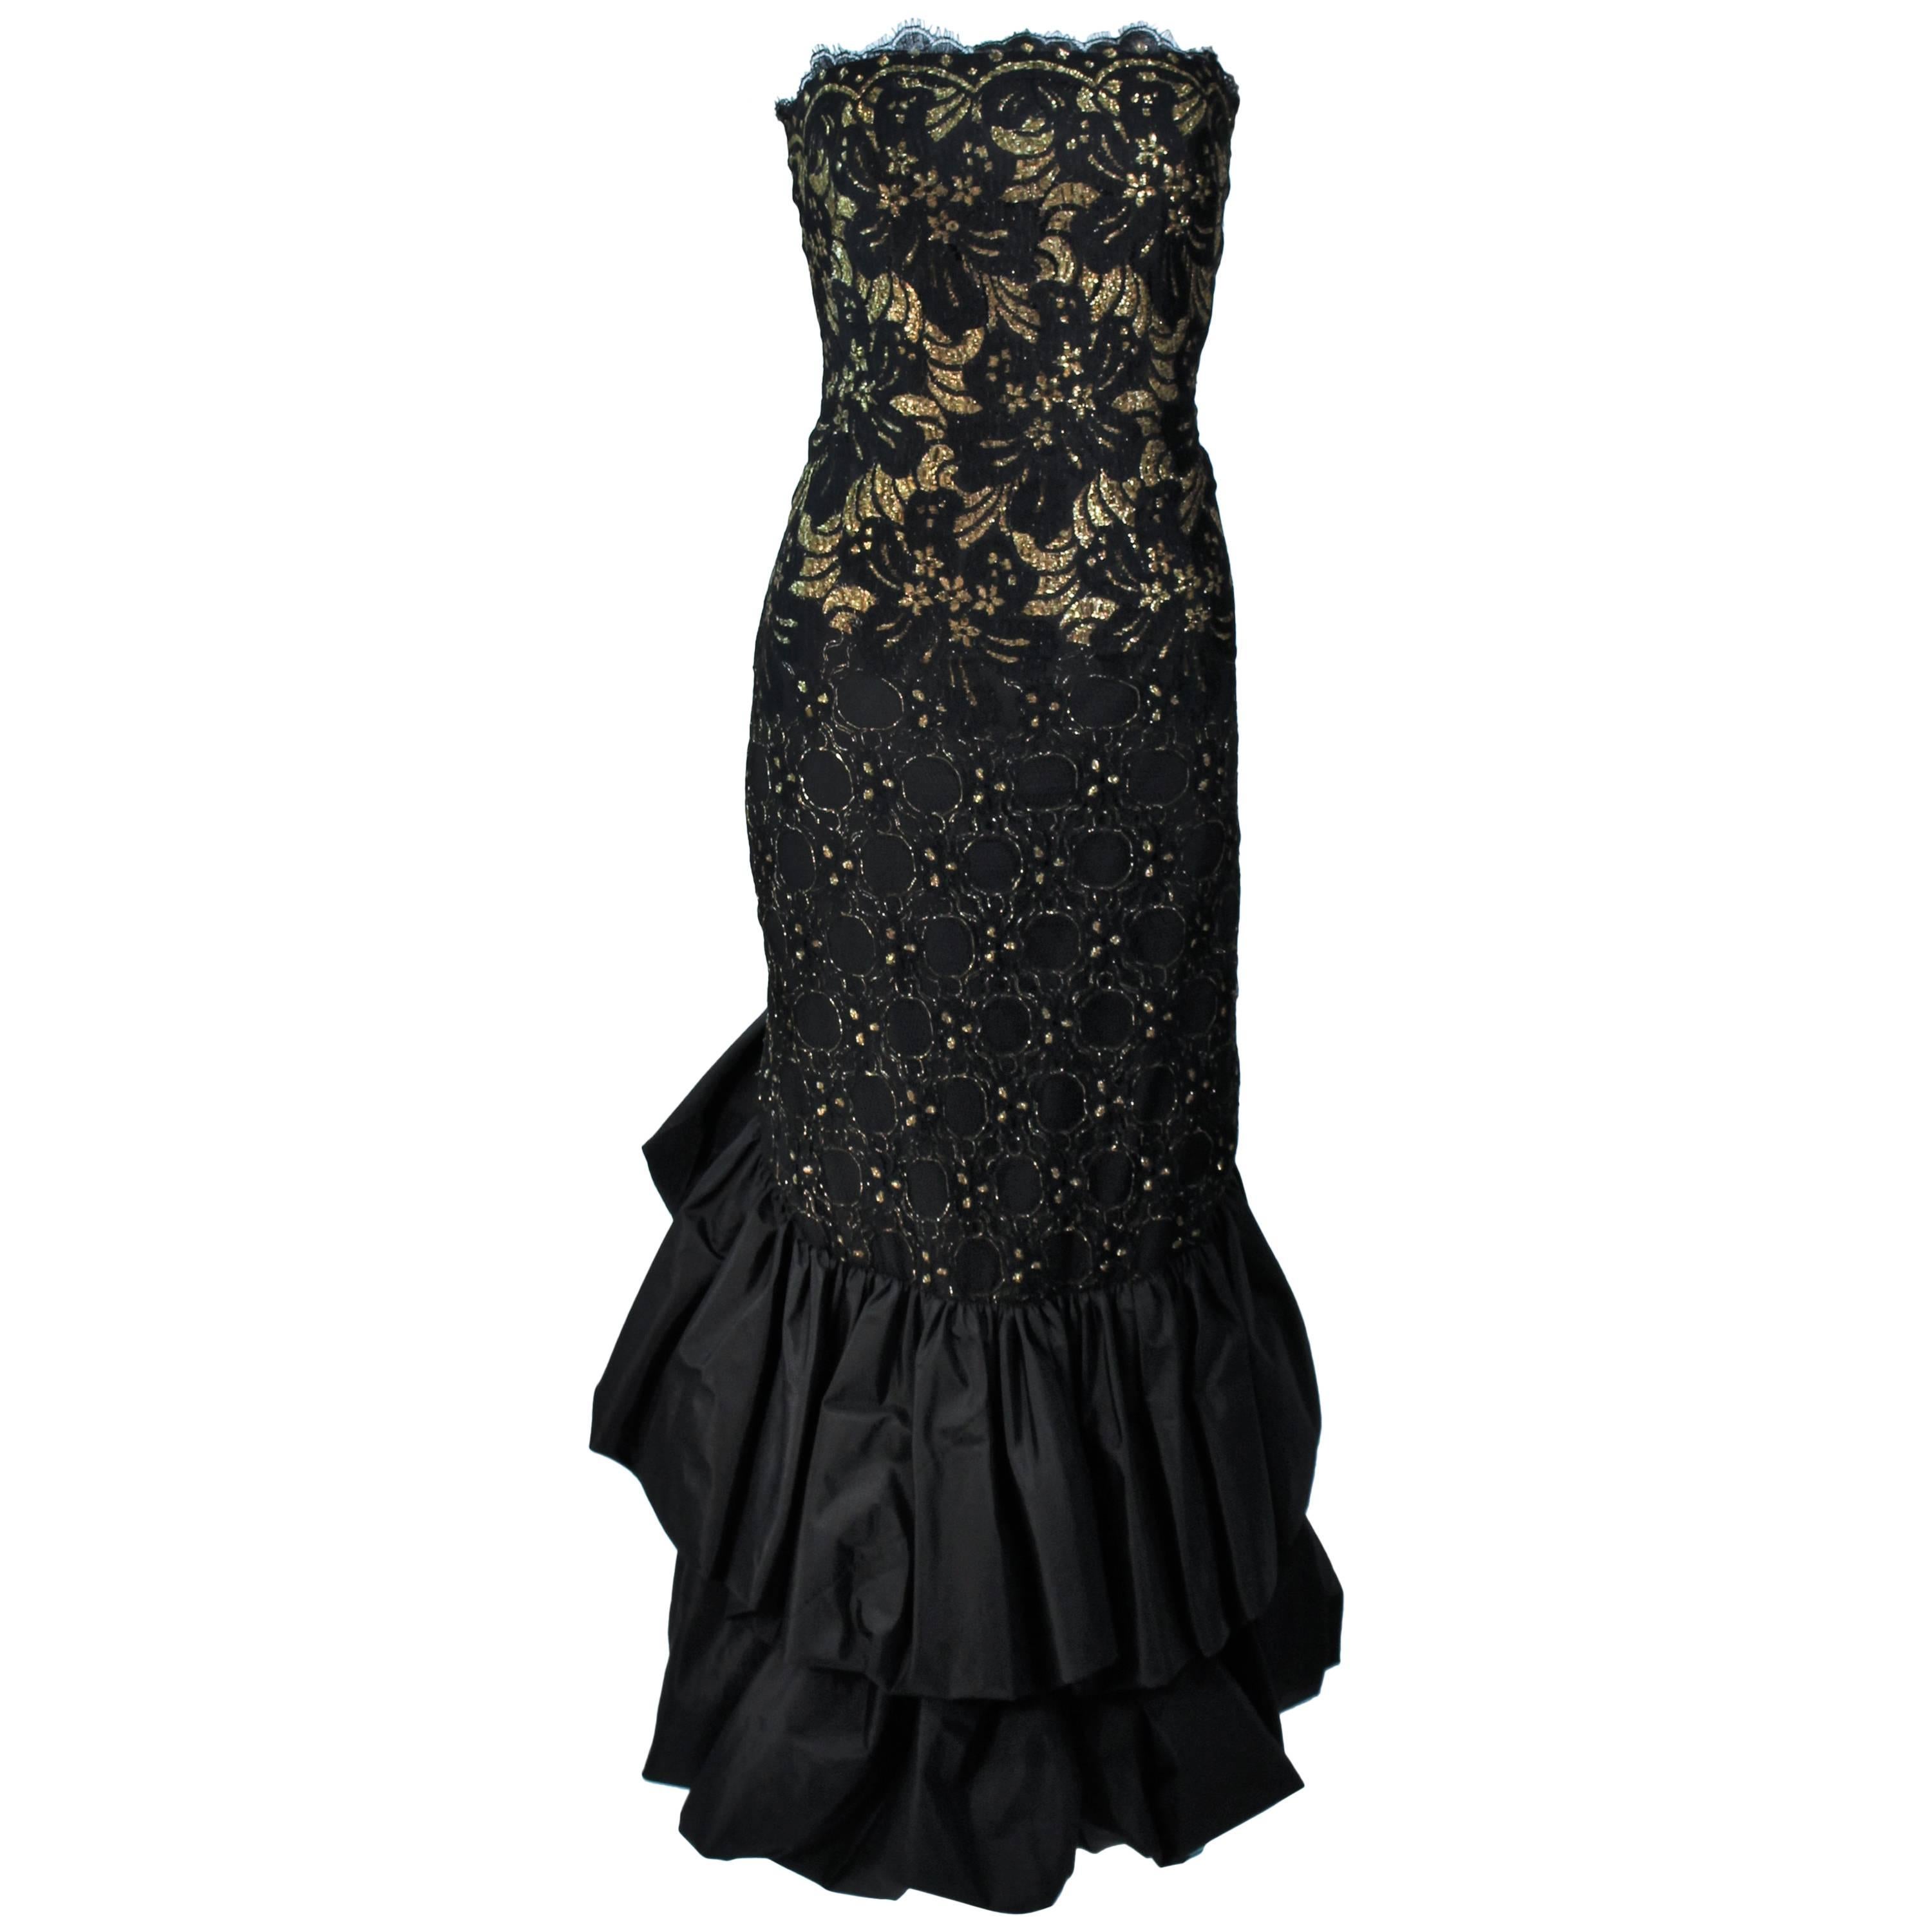 TRAVILLA Black and Gold Lace Gown with Puffed Hem and Scallop Edge Size 6